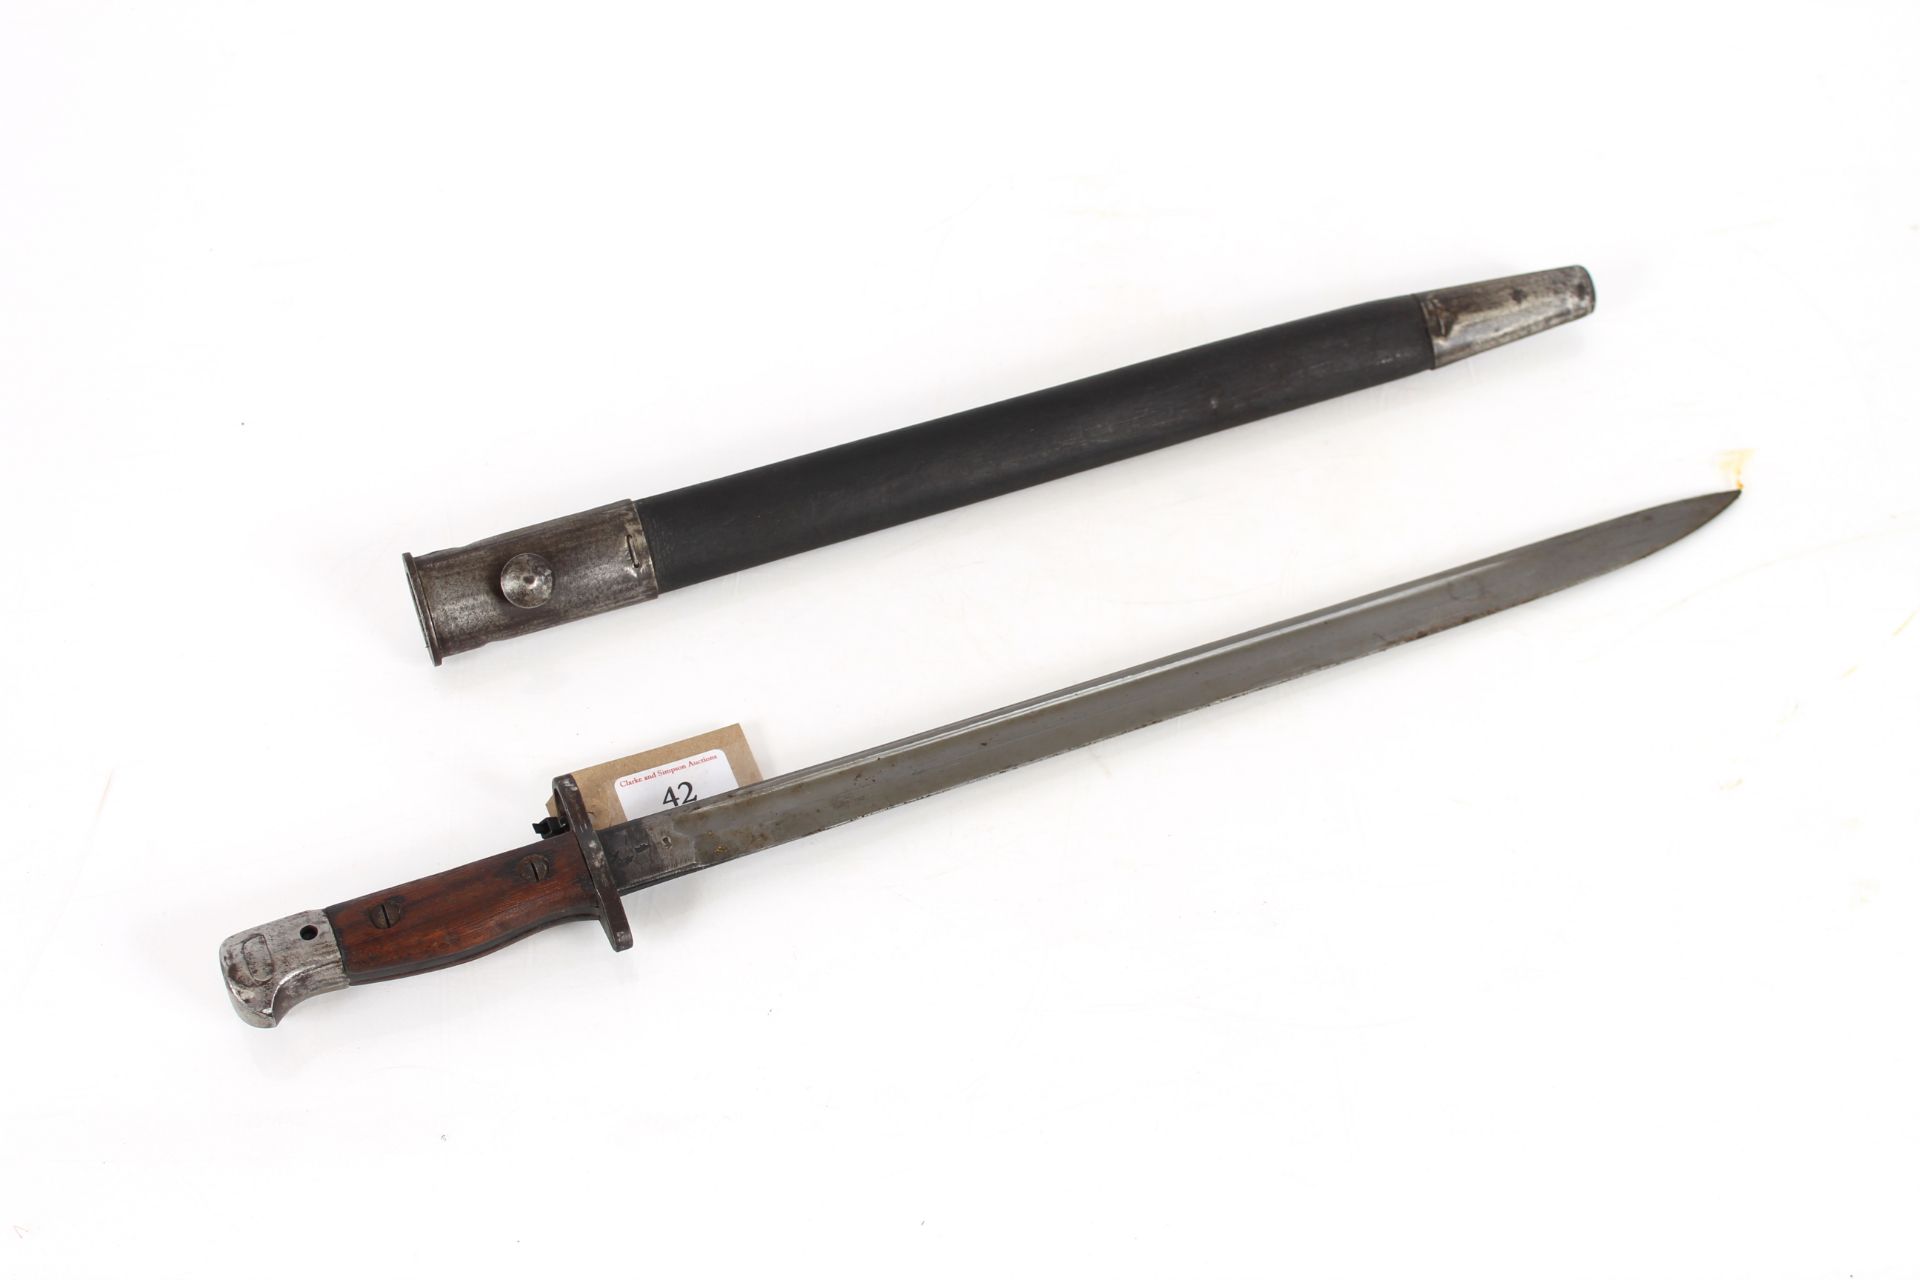 A British model 1907 bayonet with scabbard by Wilk